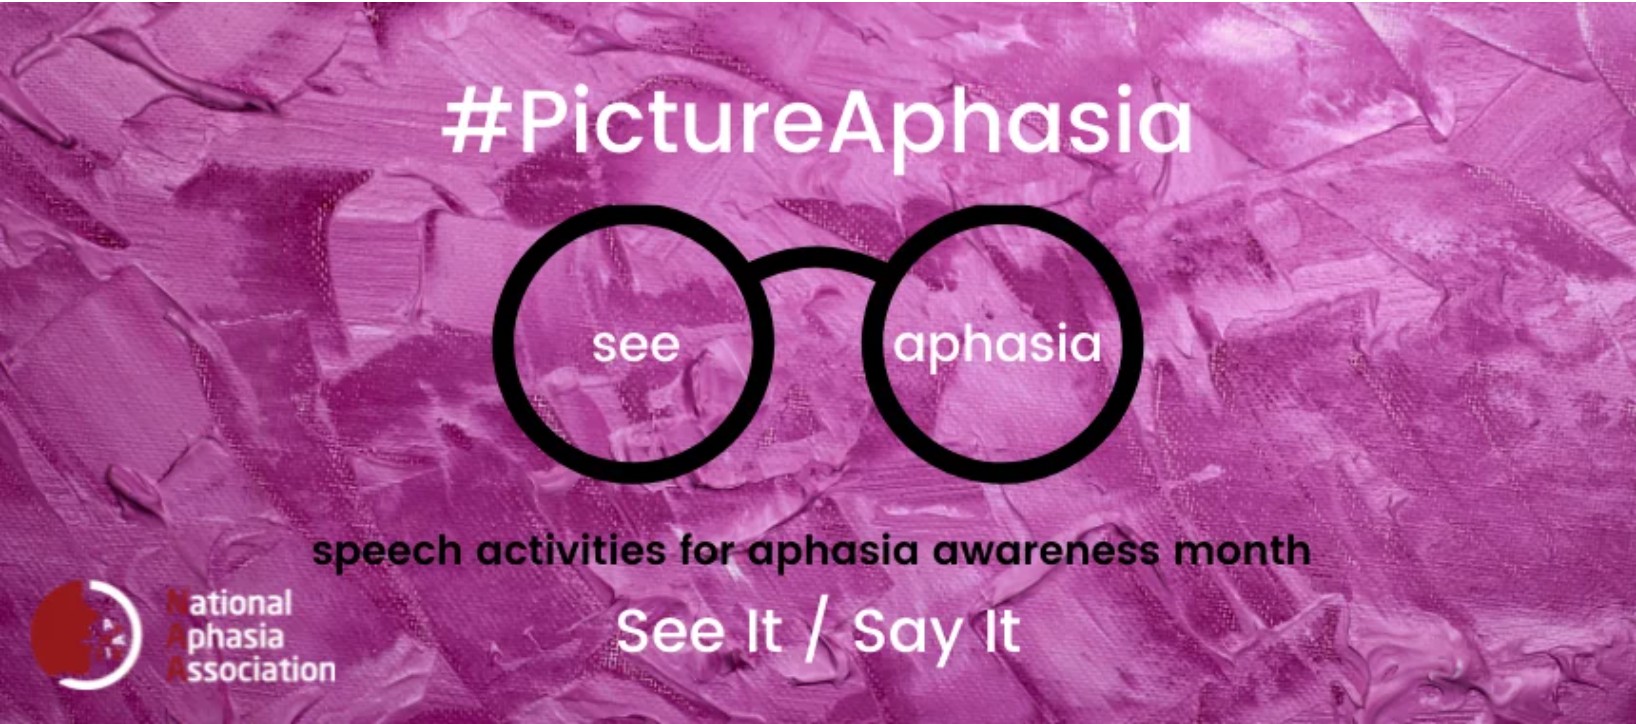 National Aphasia Association speech activities for Aphasia Awareness Month